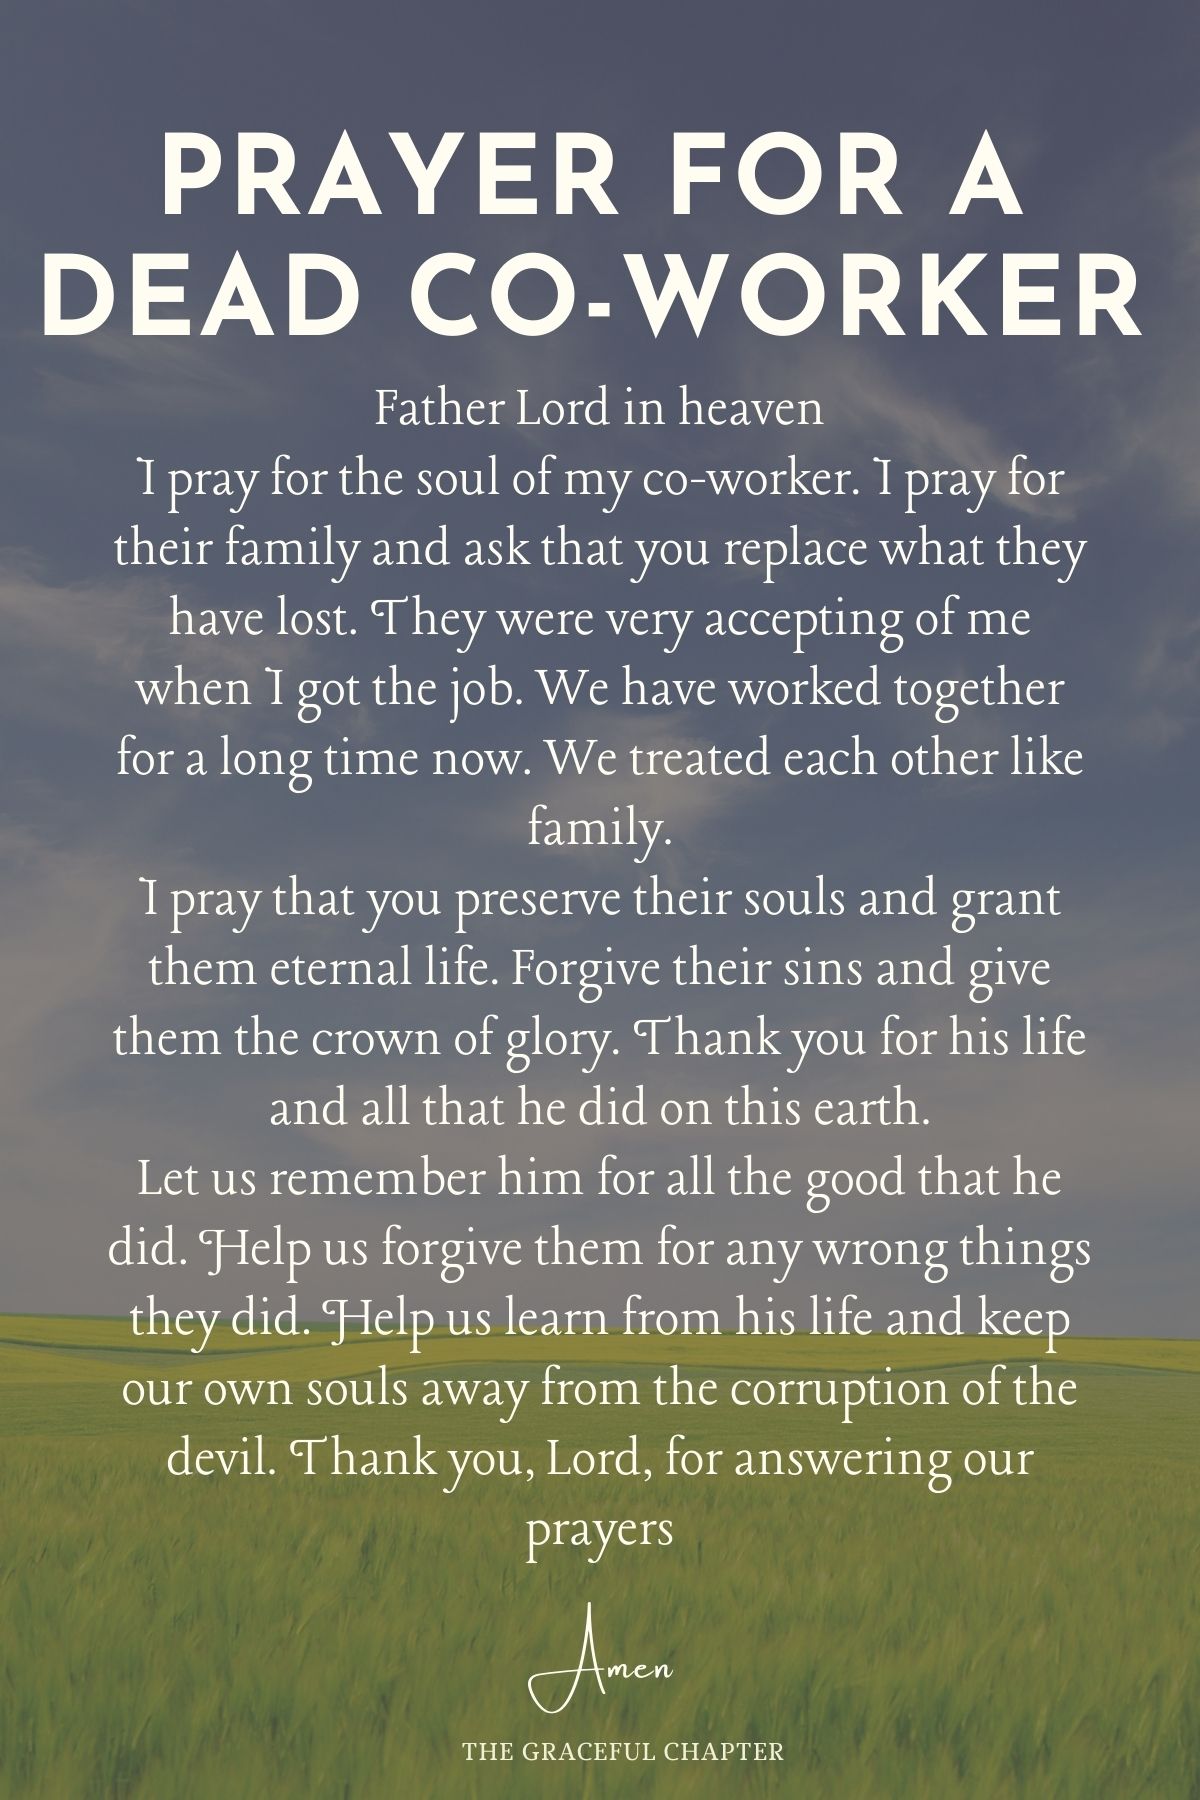 Prayer for a dead co-worker - prayers for the dead